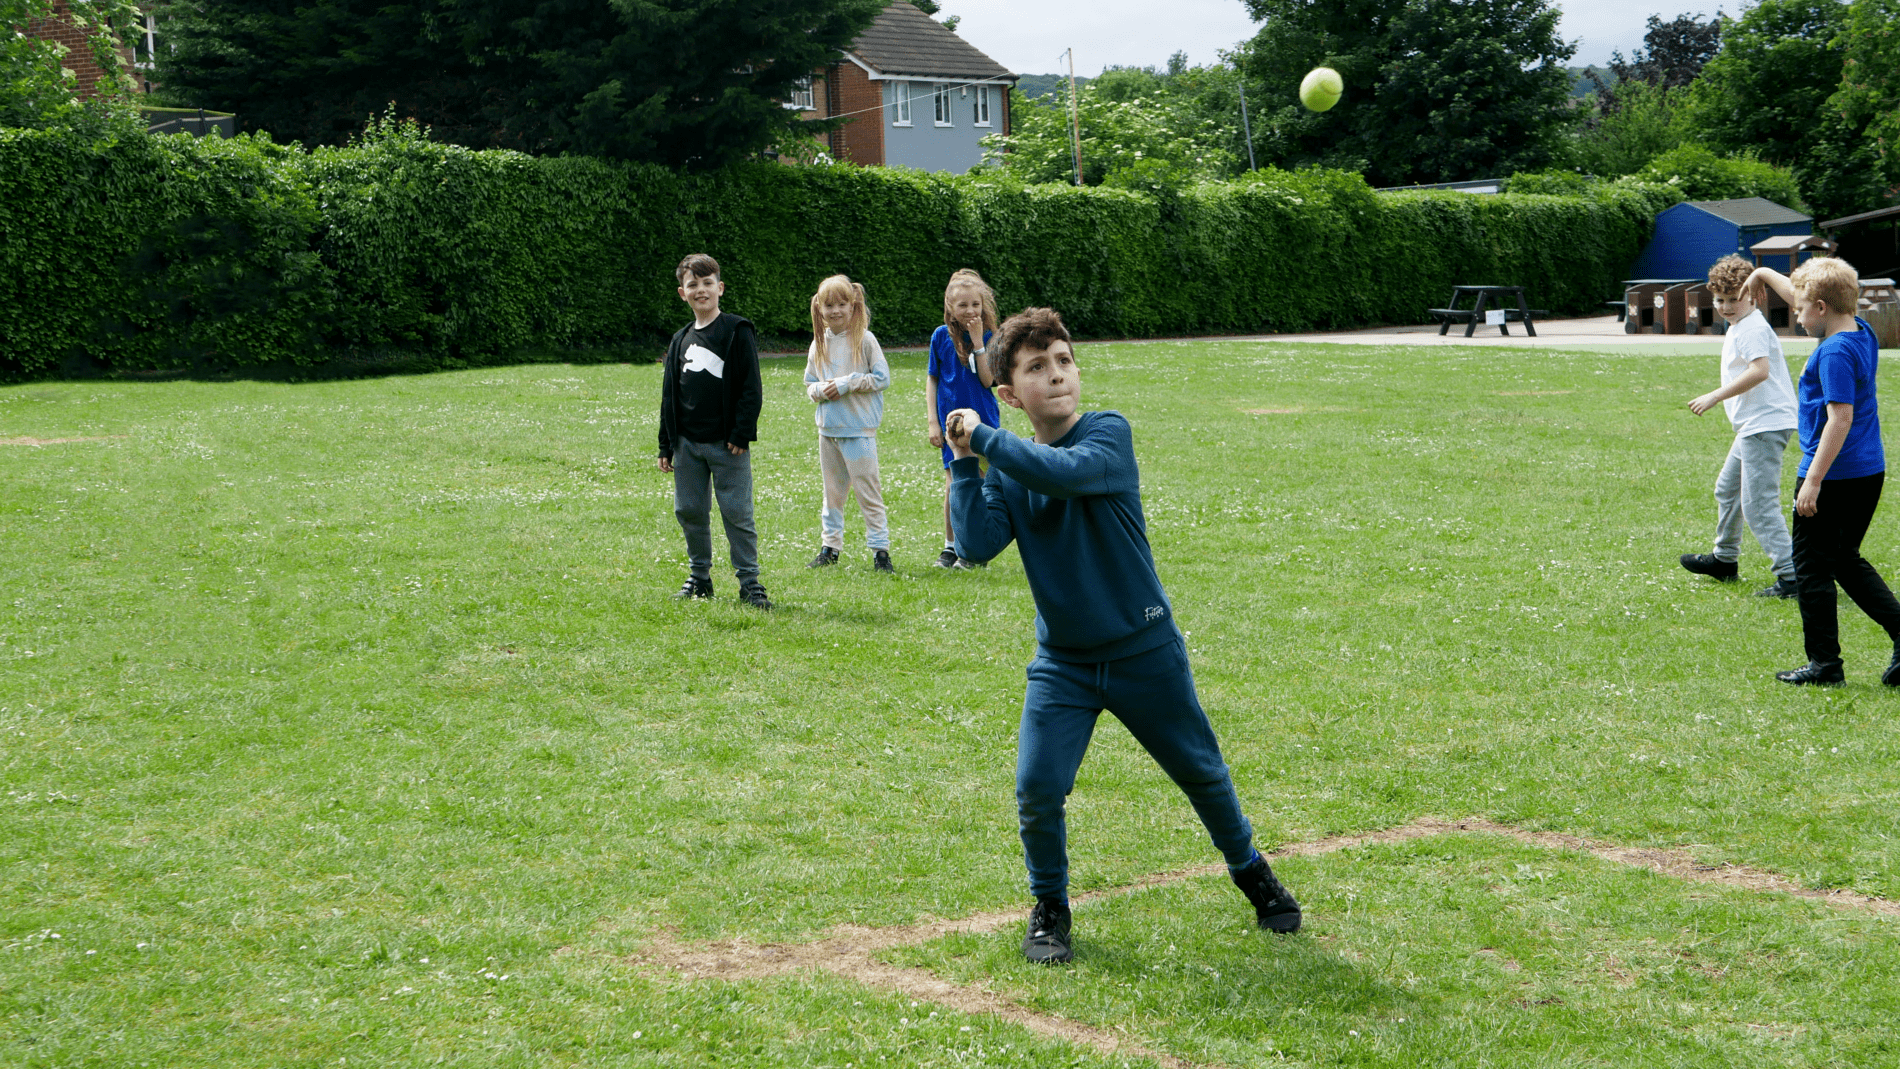 pupil preparing to hit a ball during a game of rounders in PE at horton kirby primary school